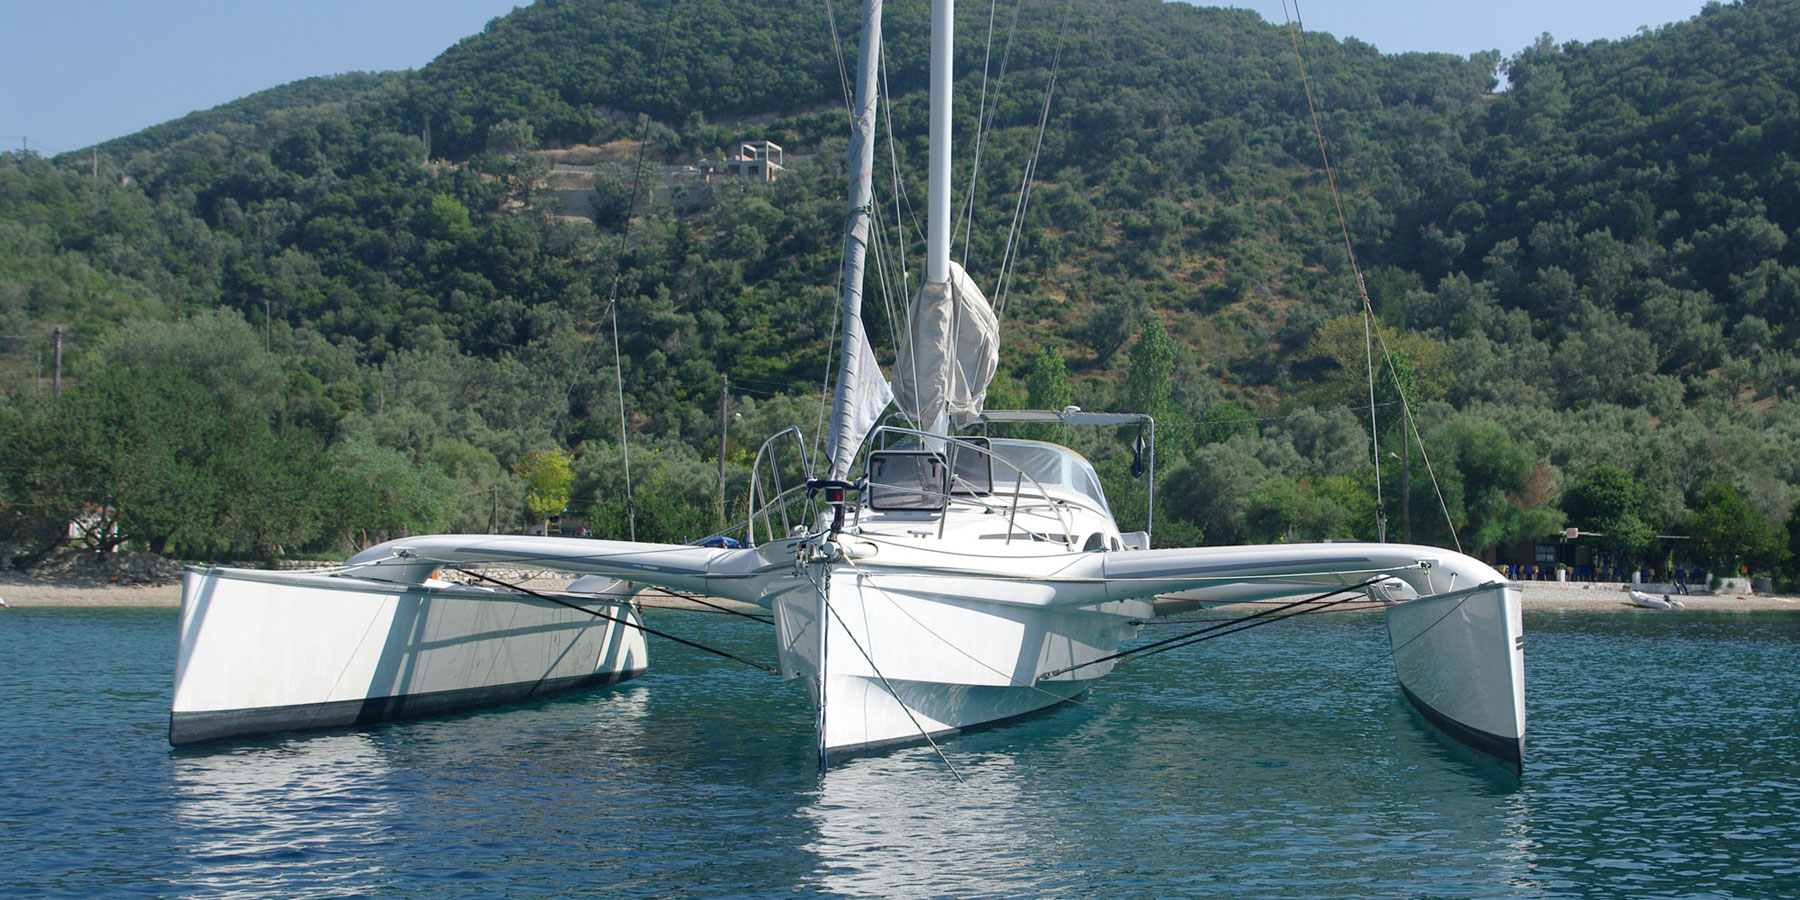 Dragonfly 35 - Luxury yacht charter France & Boat hire in France French Riviera Marseille Marseille Marina Vieux Port 2